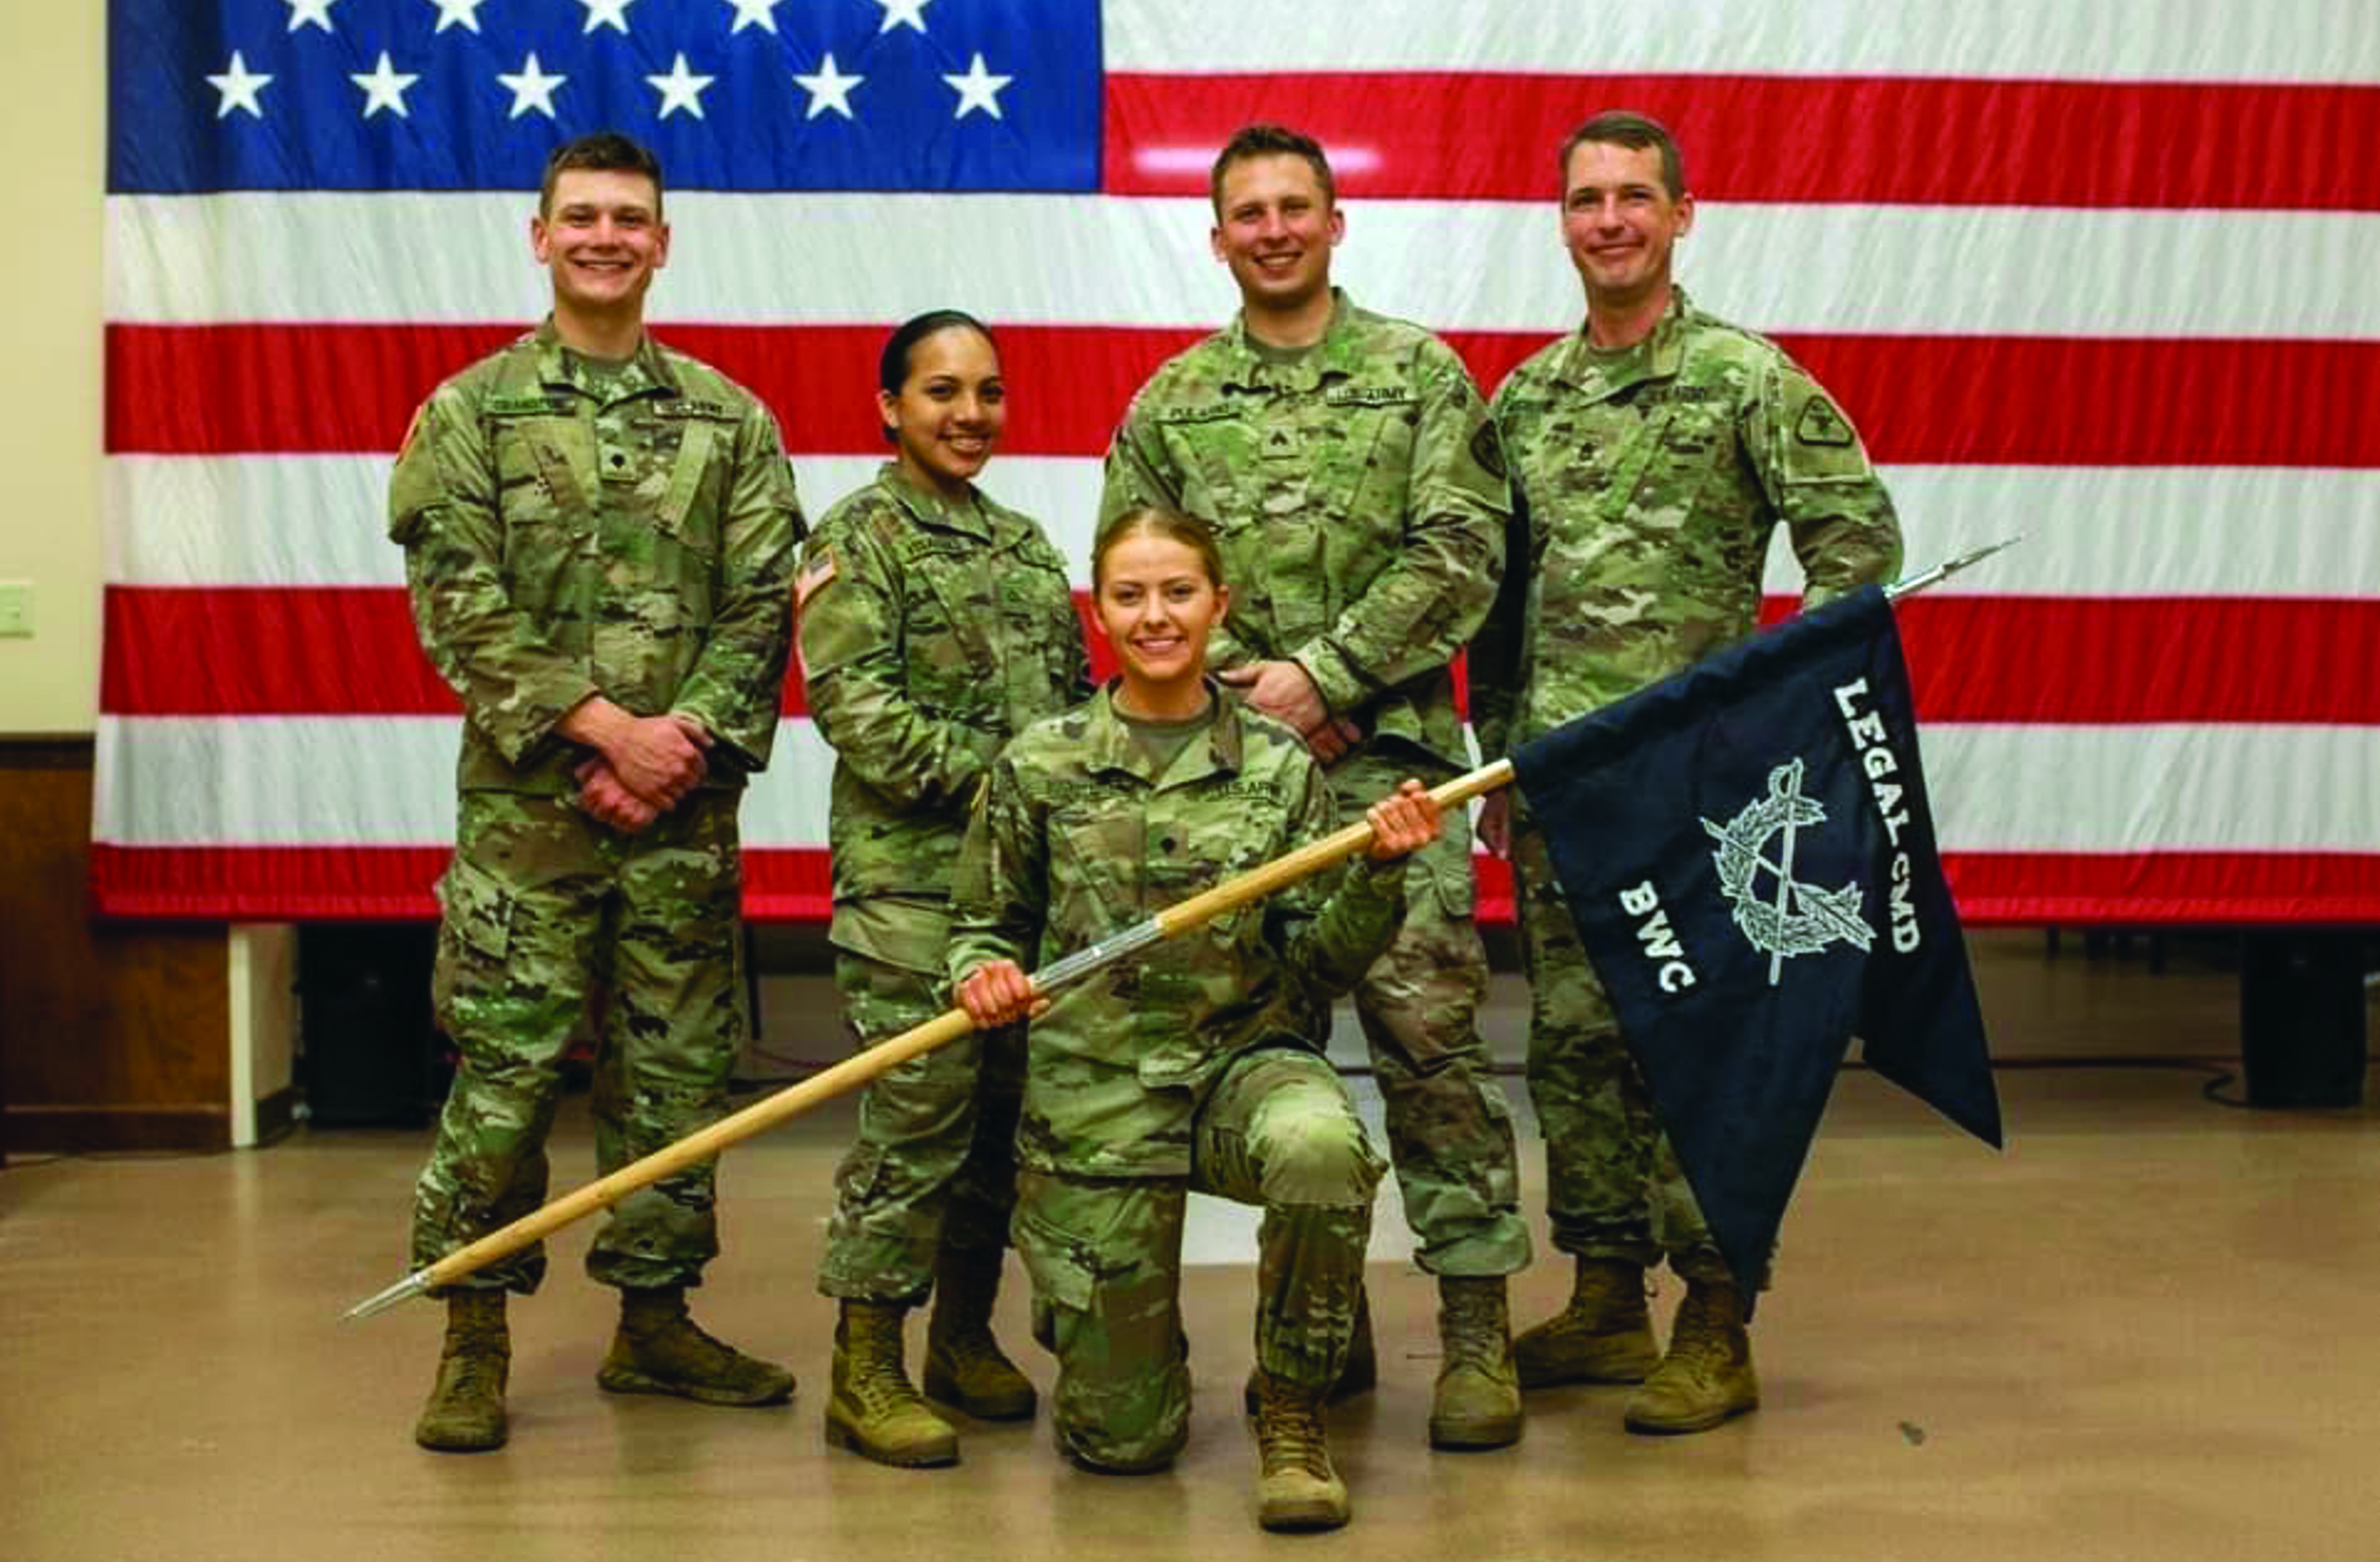 Congratulations to the winners of the 2022 USAR Legal Command Best Warrior Competition. SGT Michael Pulaski (3d LOD) was the NCO of the Year. SPC Hel - ena Bockstadter (6th LOD) was the Soldier of the Year. The other three USARLC BWC Competitors were SFC Benjamin McCallum (7th LOD), SPC Michael Cranston (3d LOD), and PFC Analycia Velazquez (78th LOD).